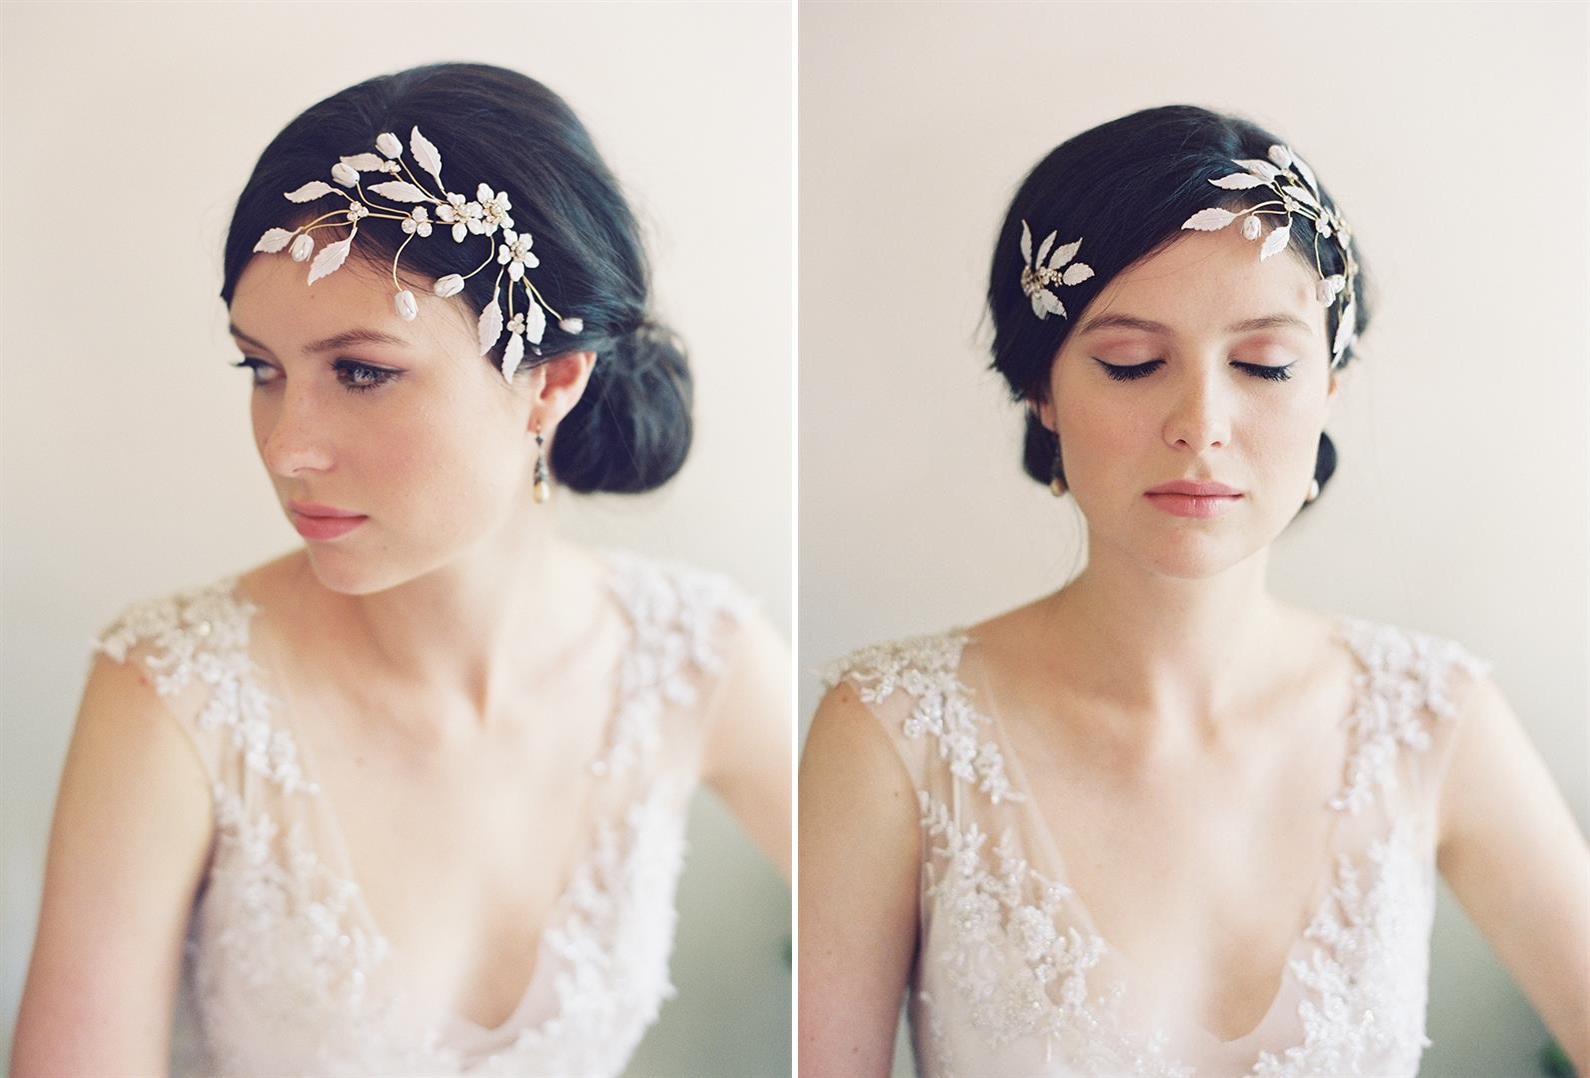 Bridal Headpieces from Erica Elizabeth Designs English Rose Collection